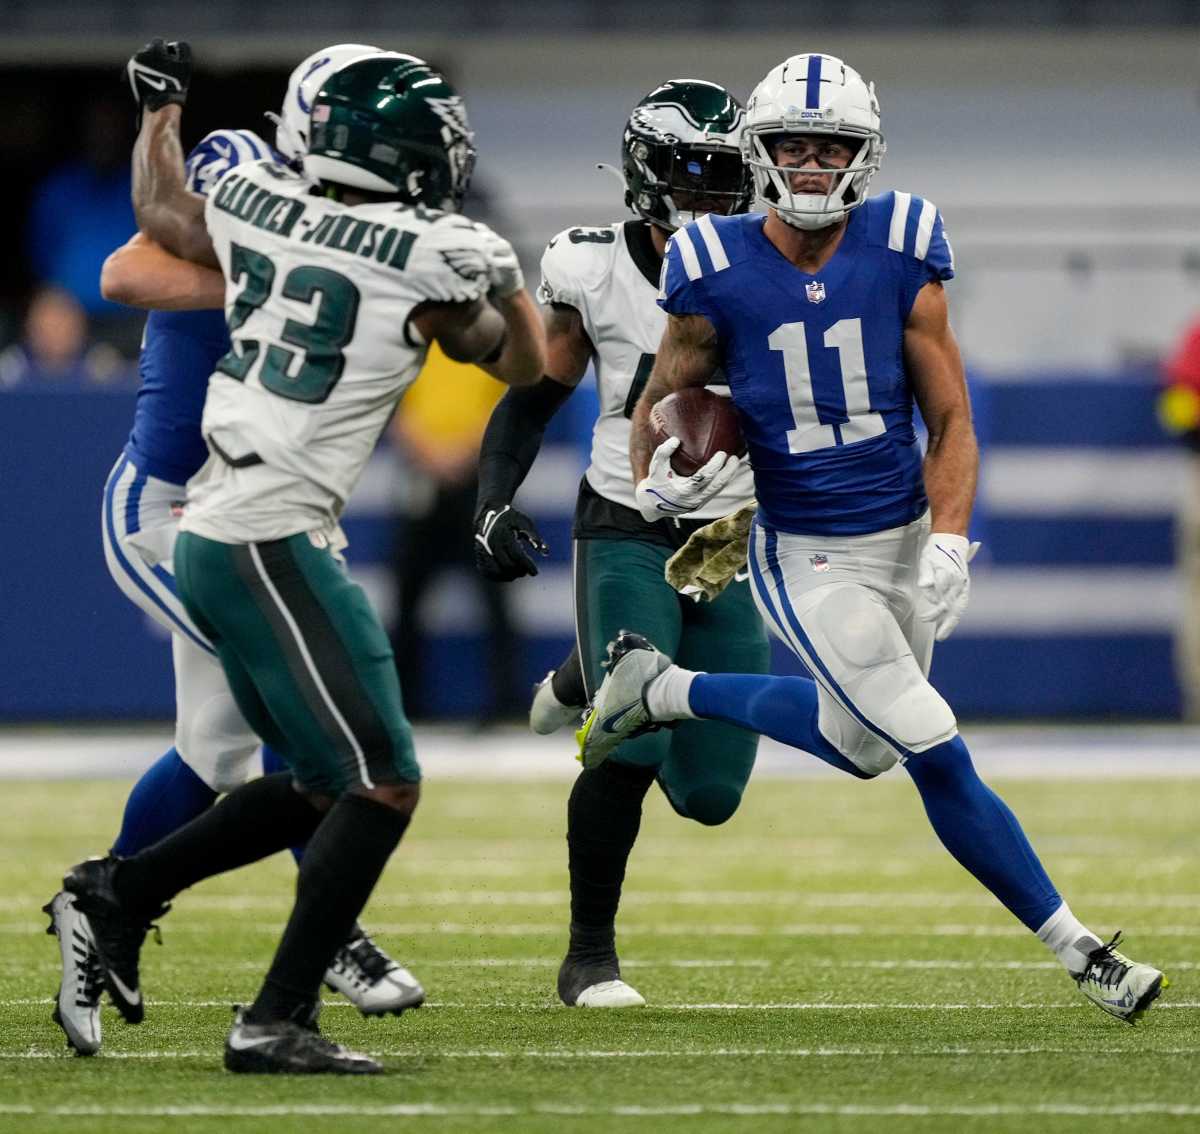 Indianapolis Colts wide receiver Michael Pittman Jr. (11) runs with the ball Sunday, Nov. 20, 2022, during a game against the Philadelphia Eagles at Lucas Oil Stadium in Indianapolis.